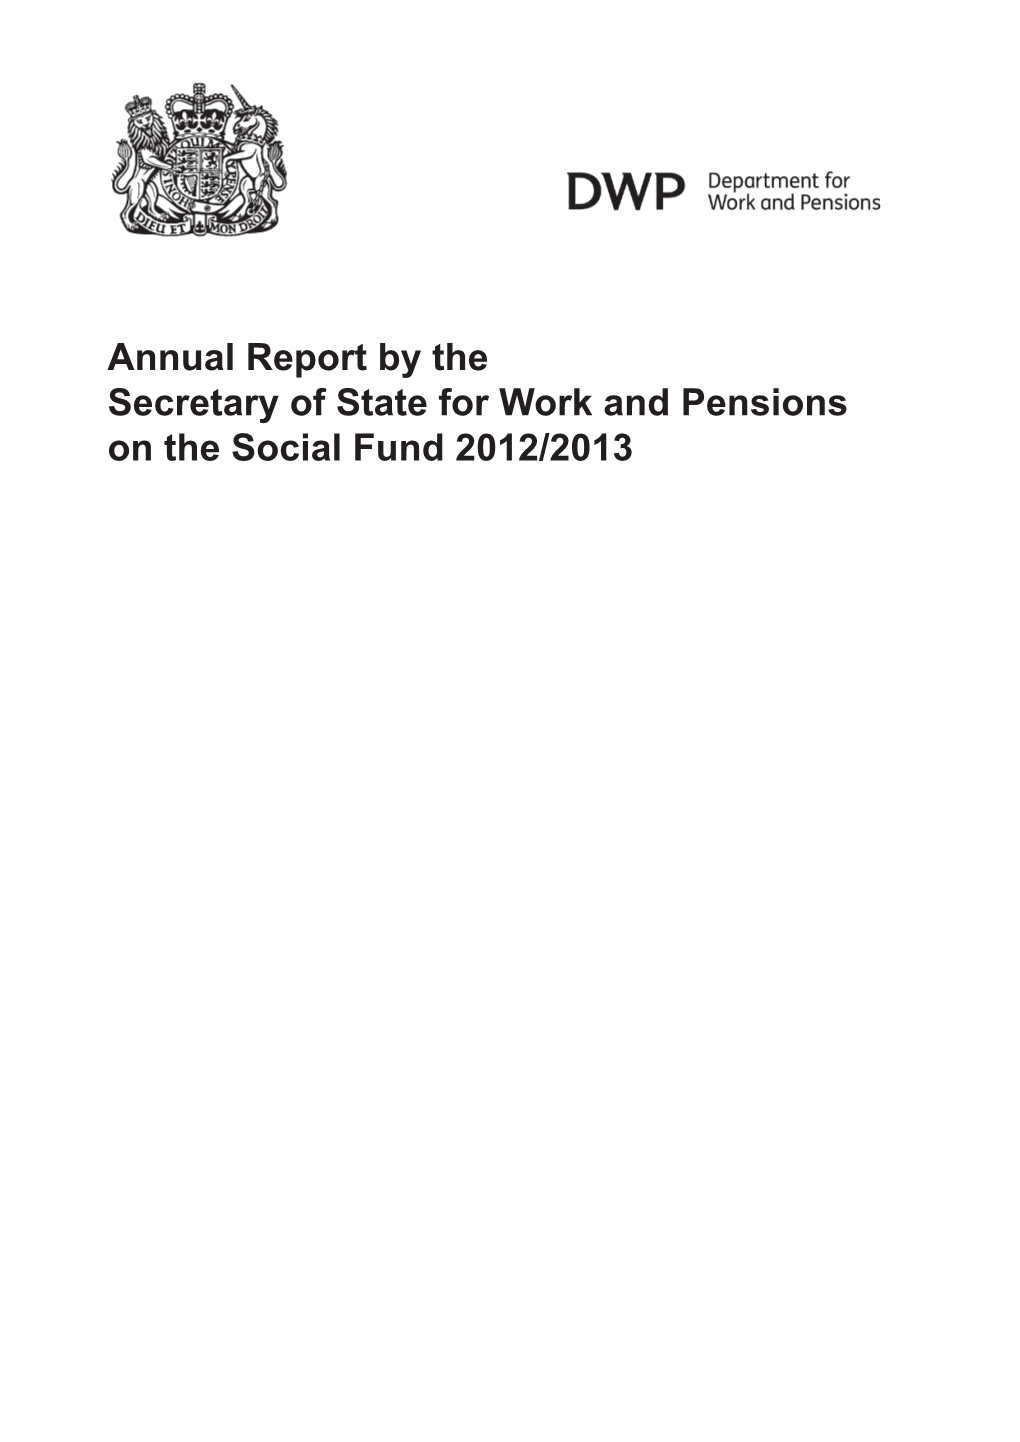 Annual Report by the Secretary of State for Work and Pensions on The